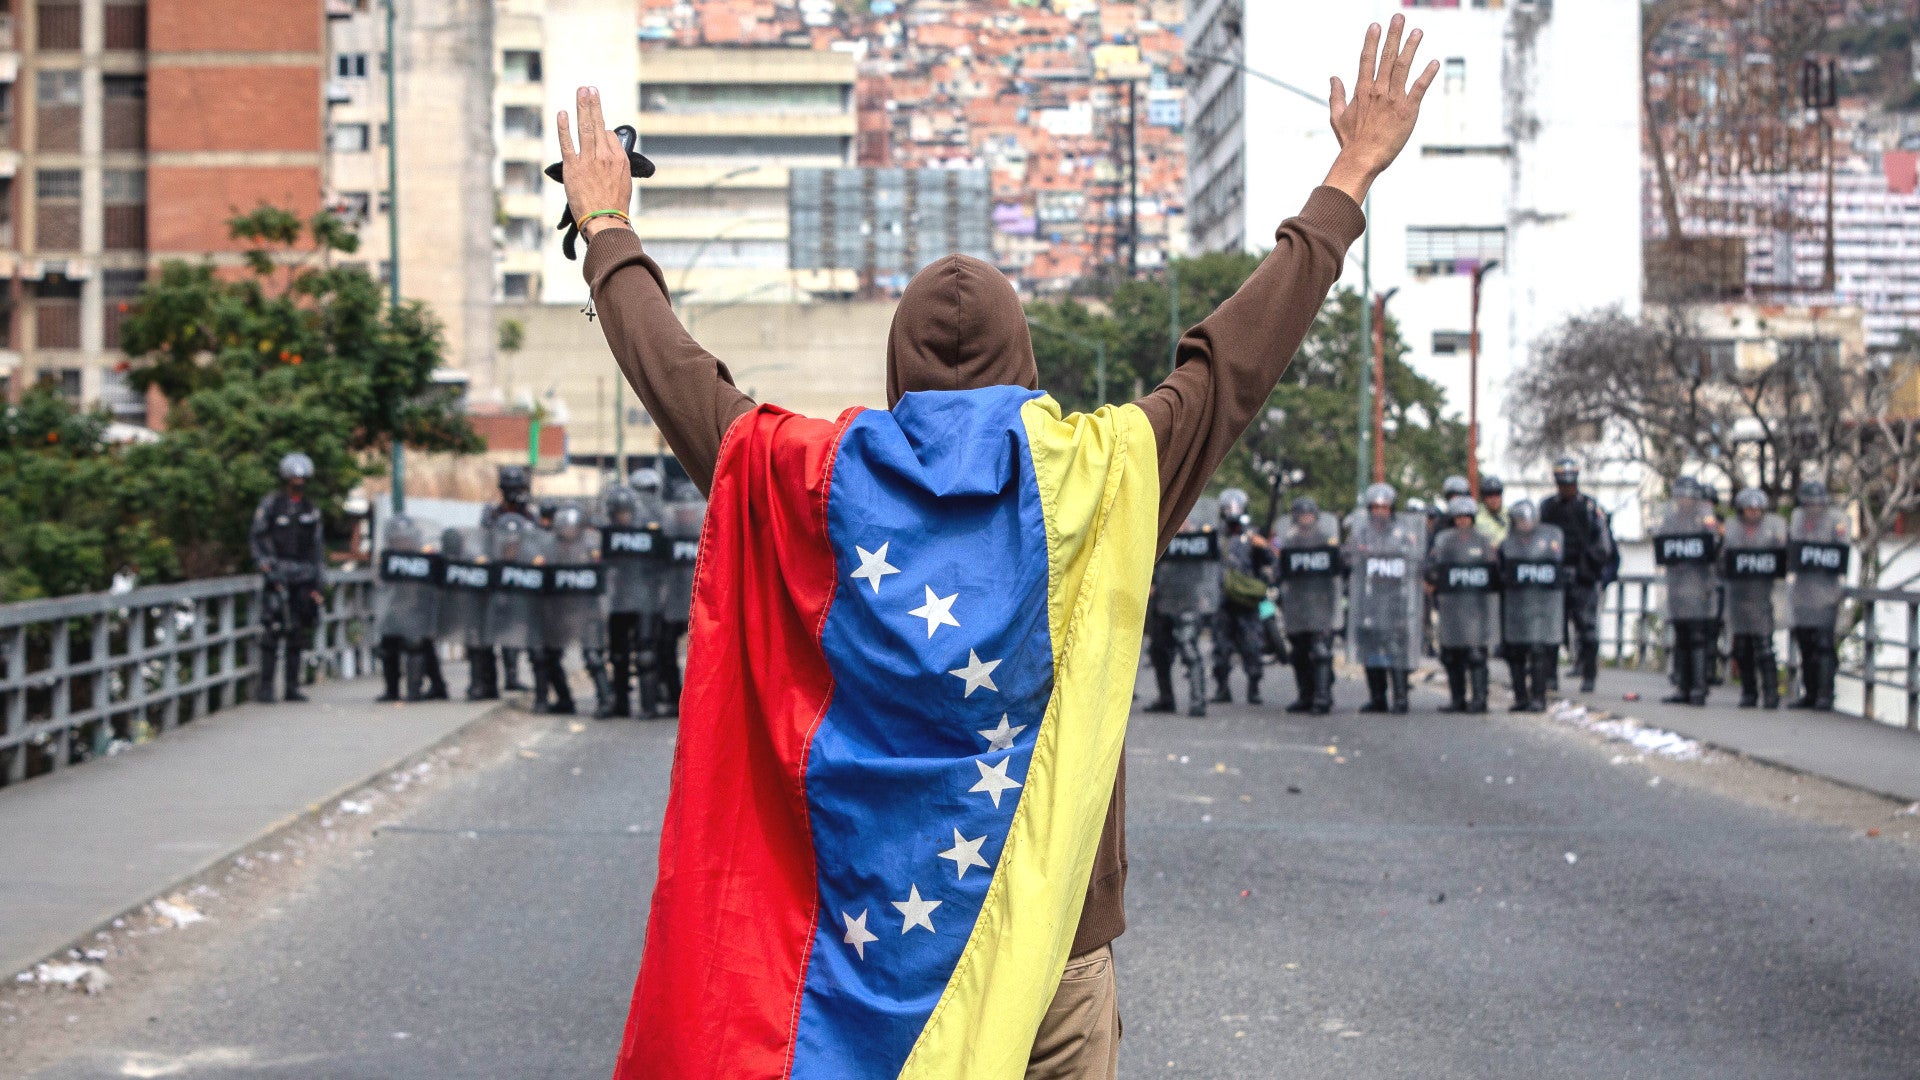 If The U.S. Has To Pull Its Diplomats Out Of Venezuela, Here’s How They Would Do It